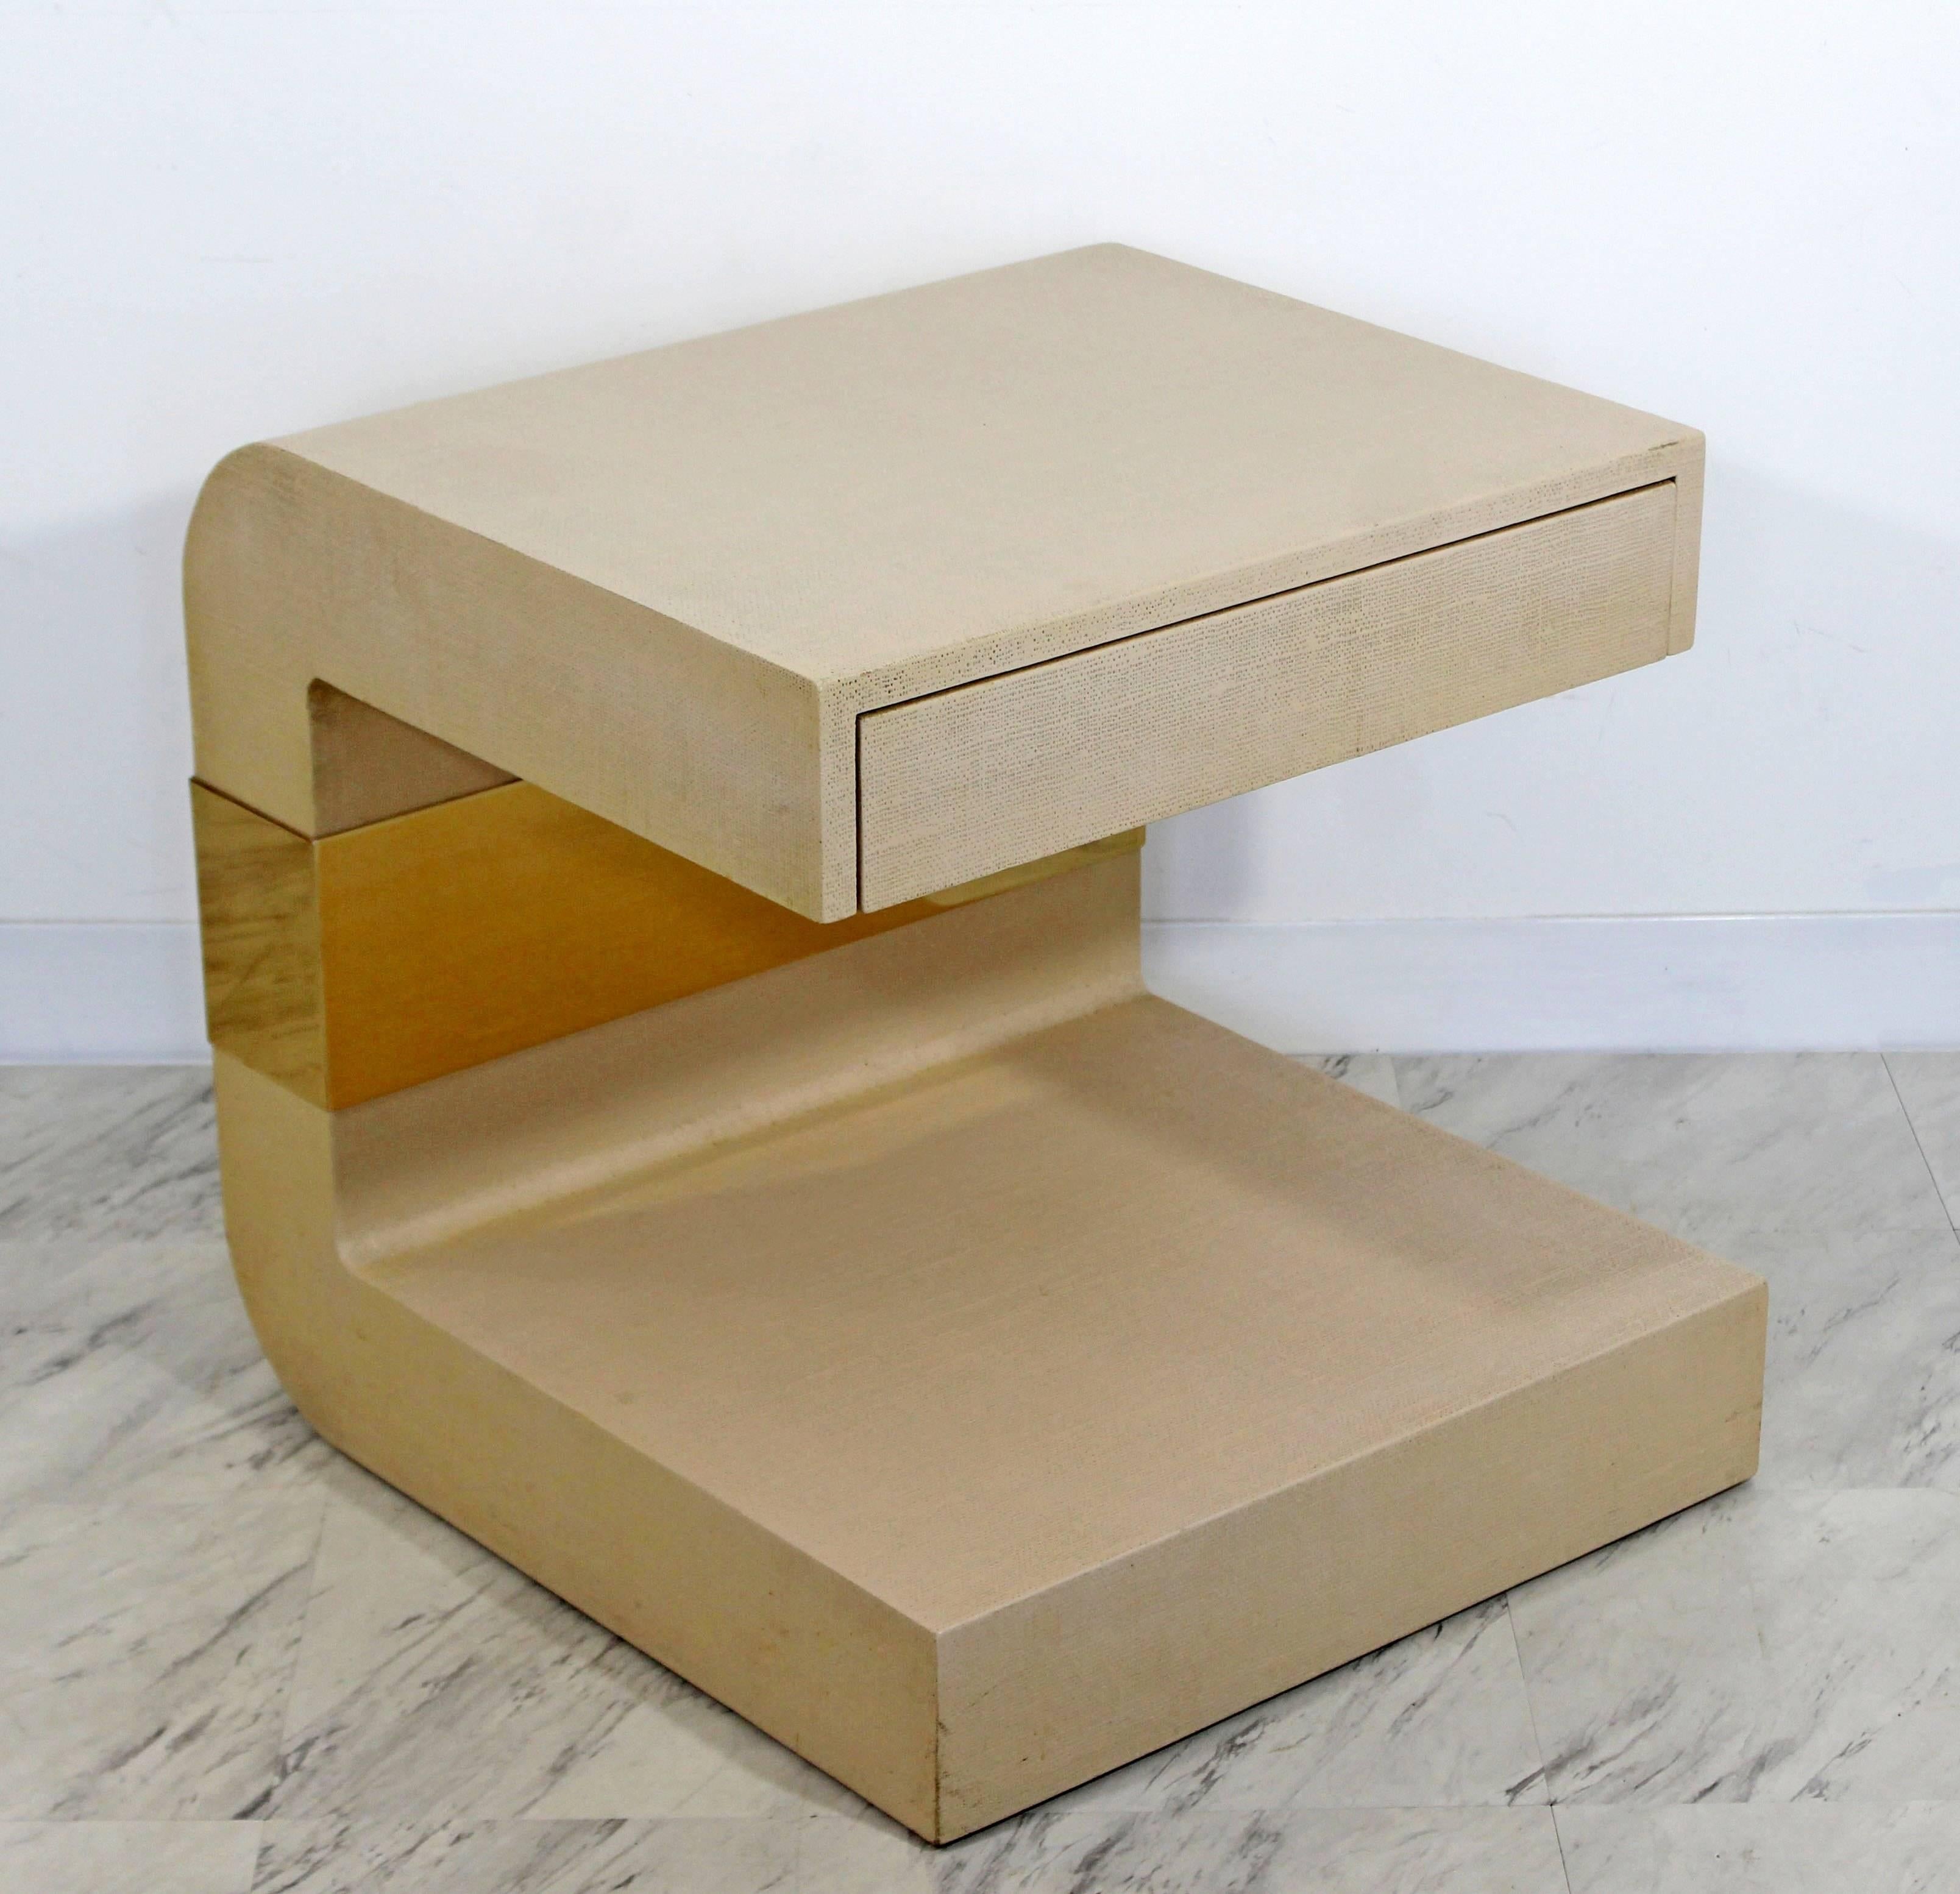 For your consideration is a stunning, sculptural side or end table, with one drawer, made of grasscloth and brass, attributed to Karl Springer, circa the 1970s. In excellent condition. The dimensions are 22